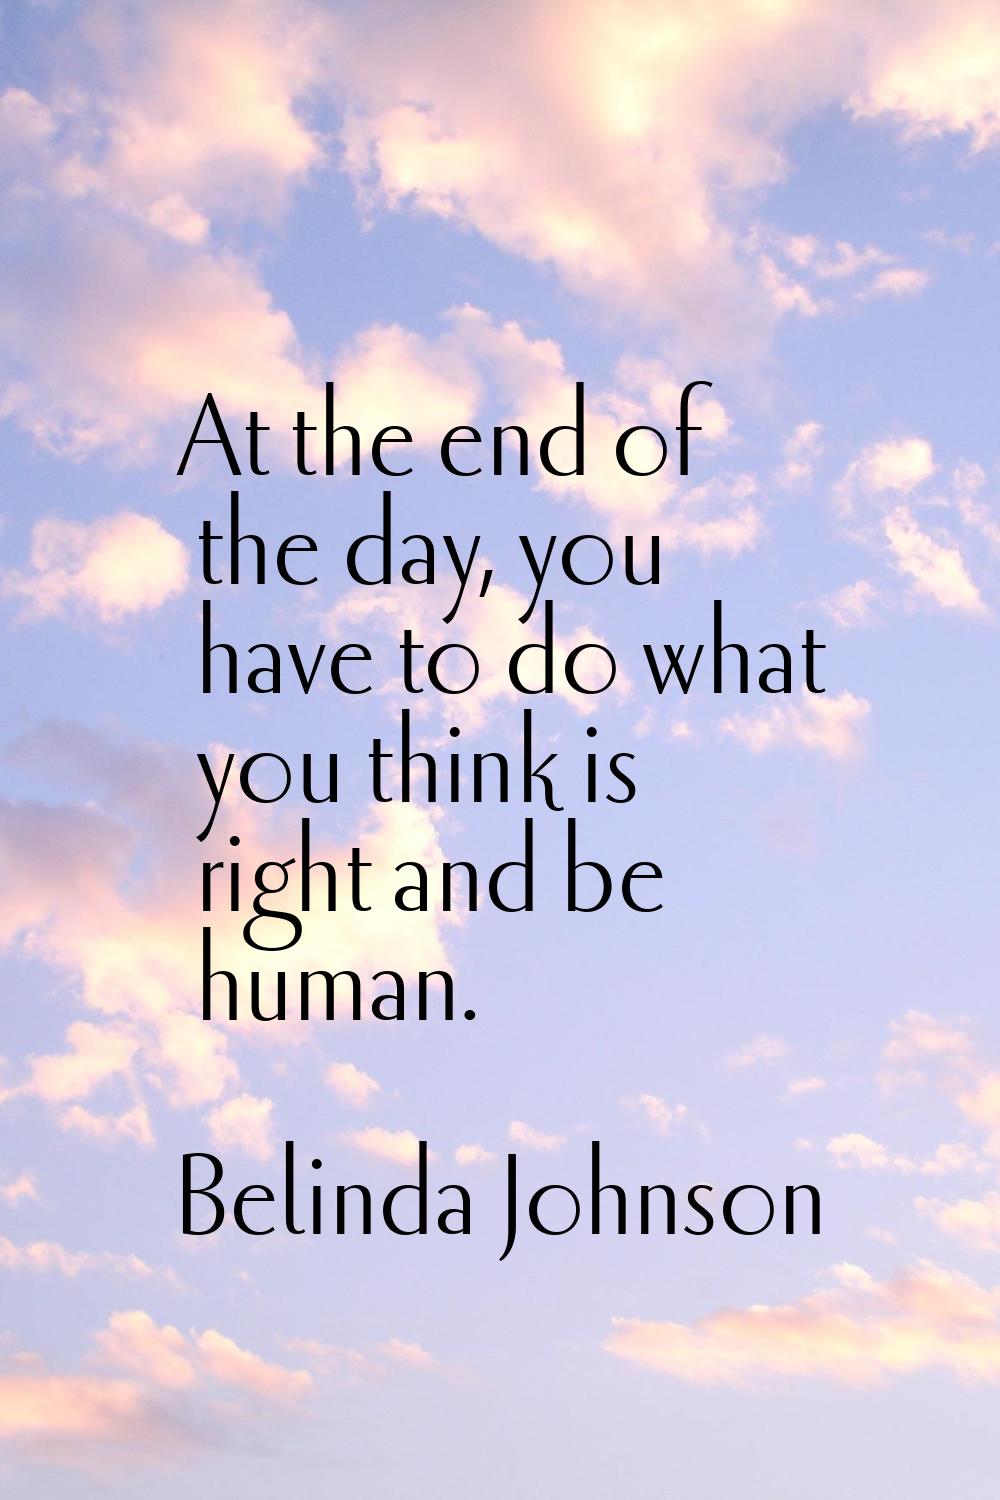 At the end of the day, you have to do what you think is right and be human.